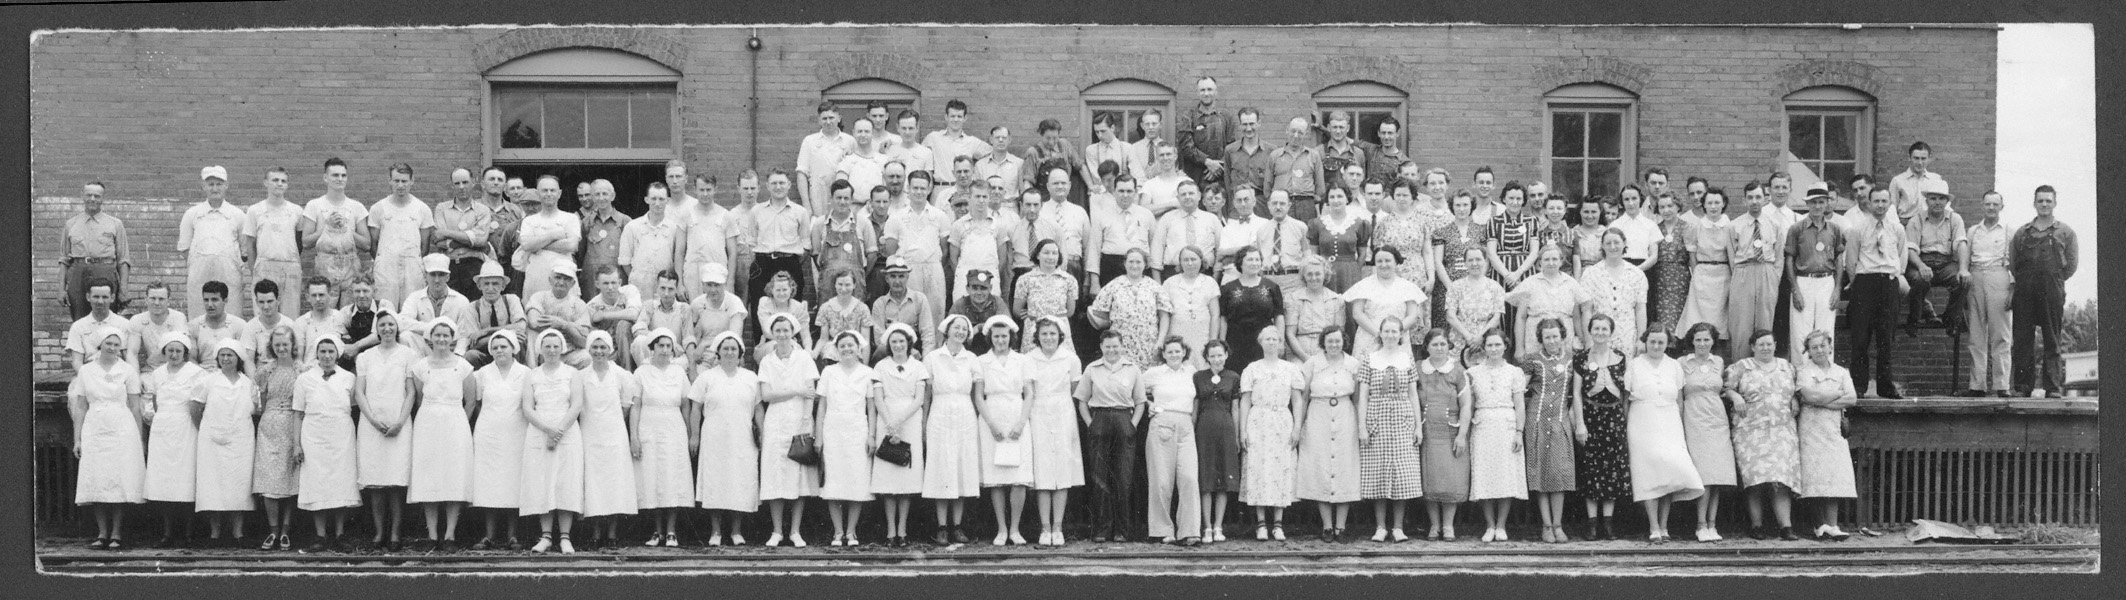 Employees of Fairmont Creamery, probably at the Crete plant, about 1920 (RG4218.PH3-17)